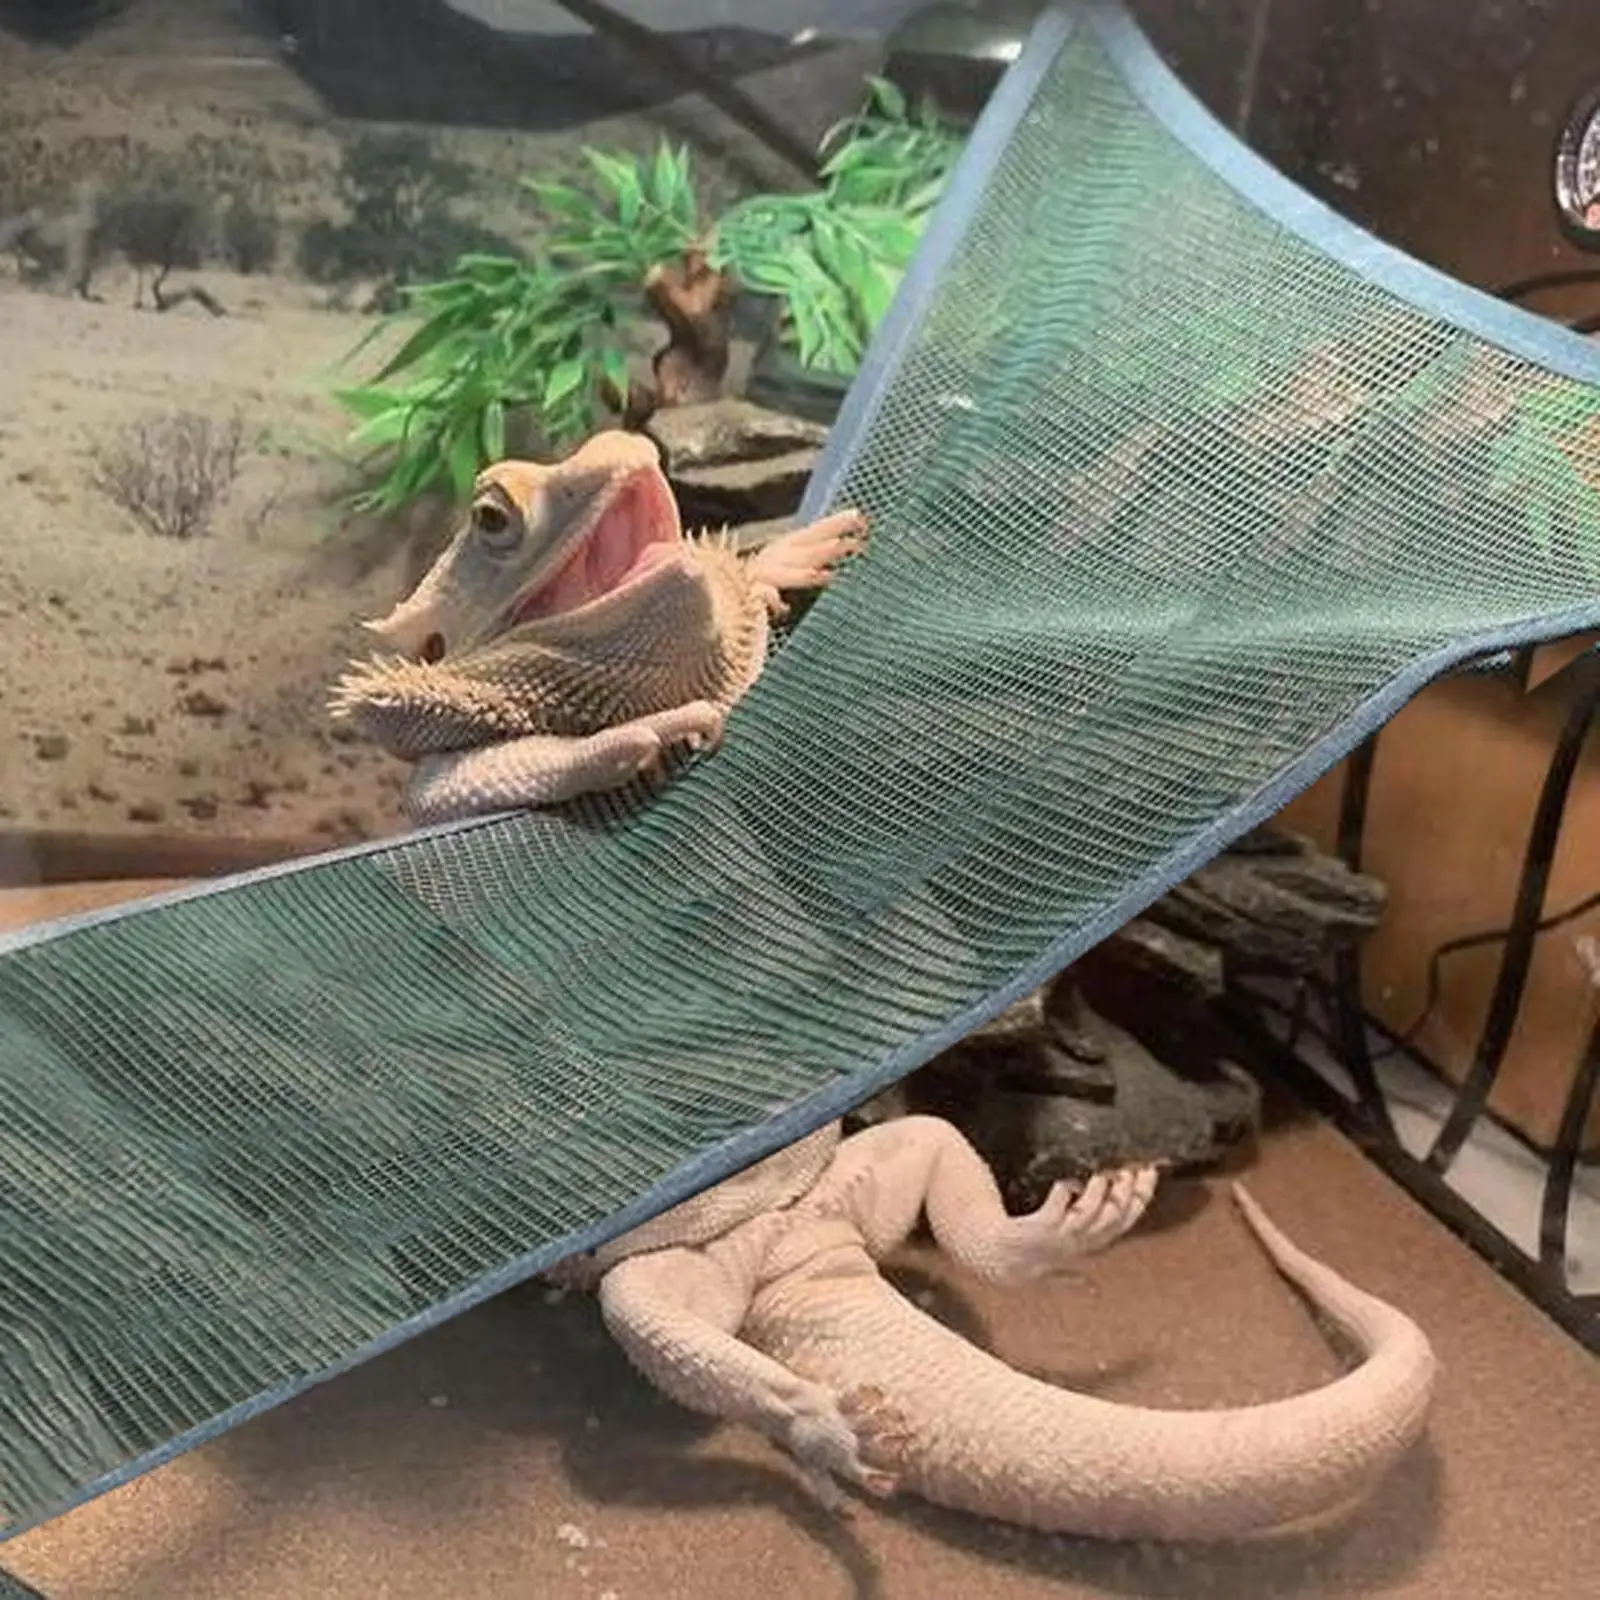 Black, M Snake and Other Reptiles Fix It Anywhere in The Reptile Case,Great for Lizard YunZyun Lizard Hammock 2Pcs Pet Mesh Hammock Sleeping Bed Climb for Reptile Lizard with Suction Cup 